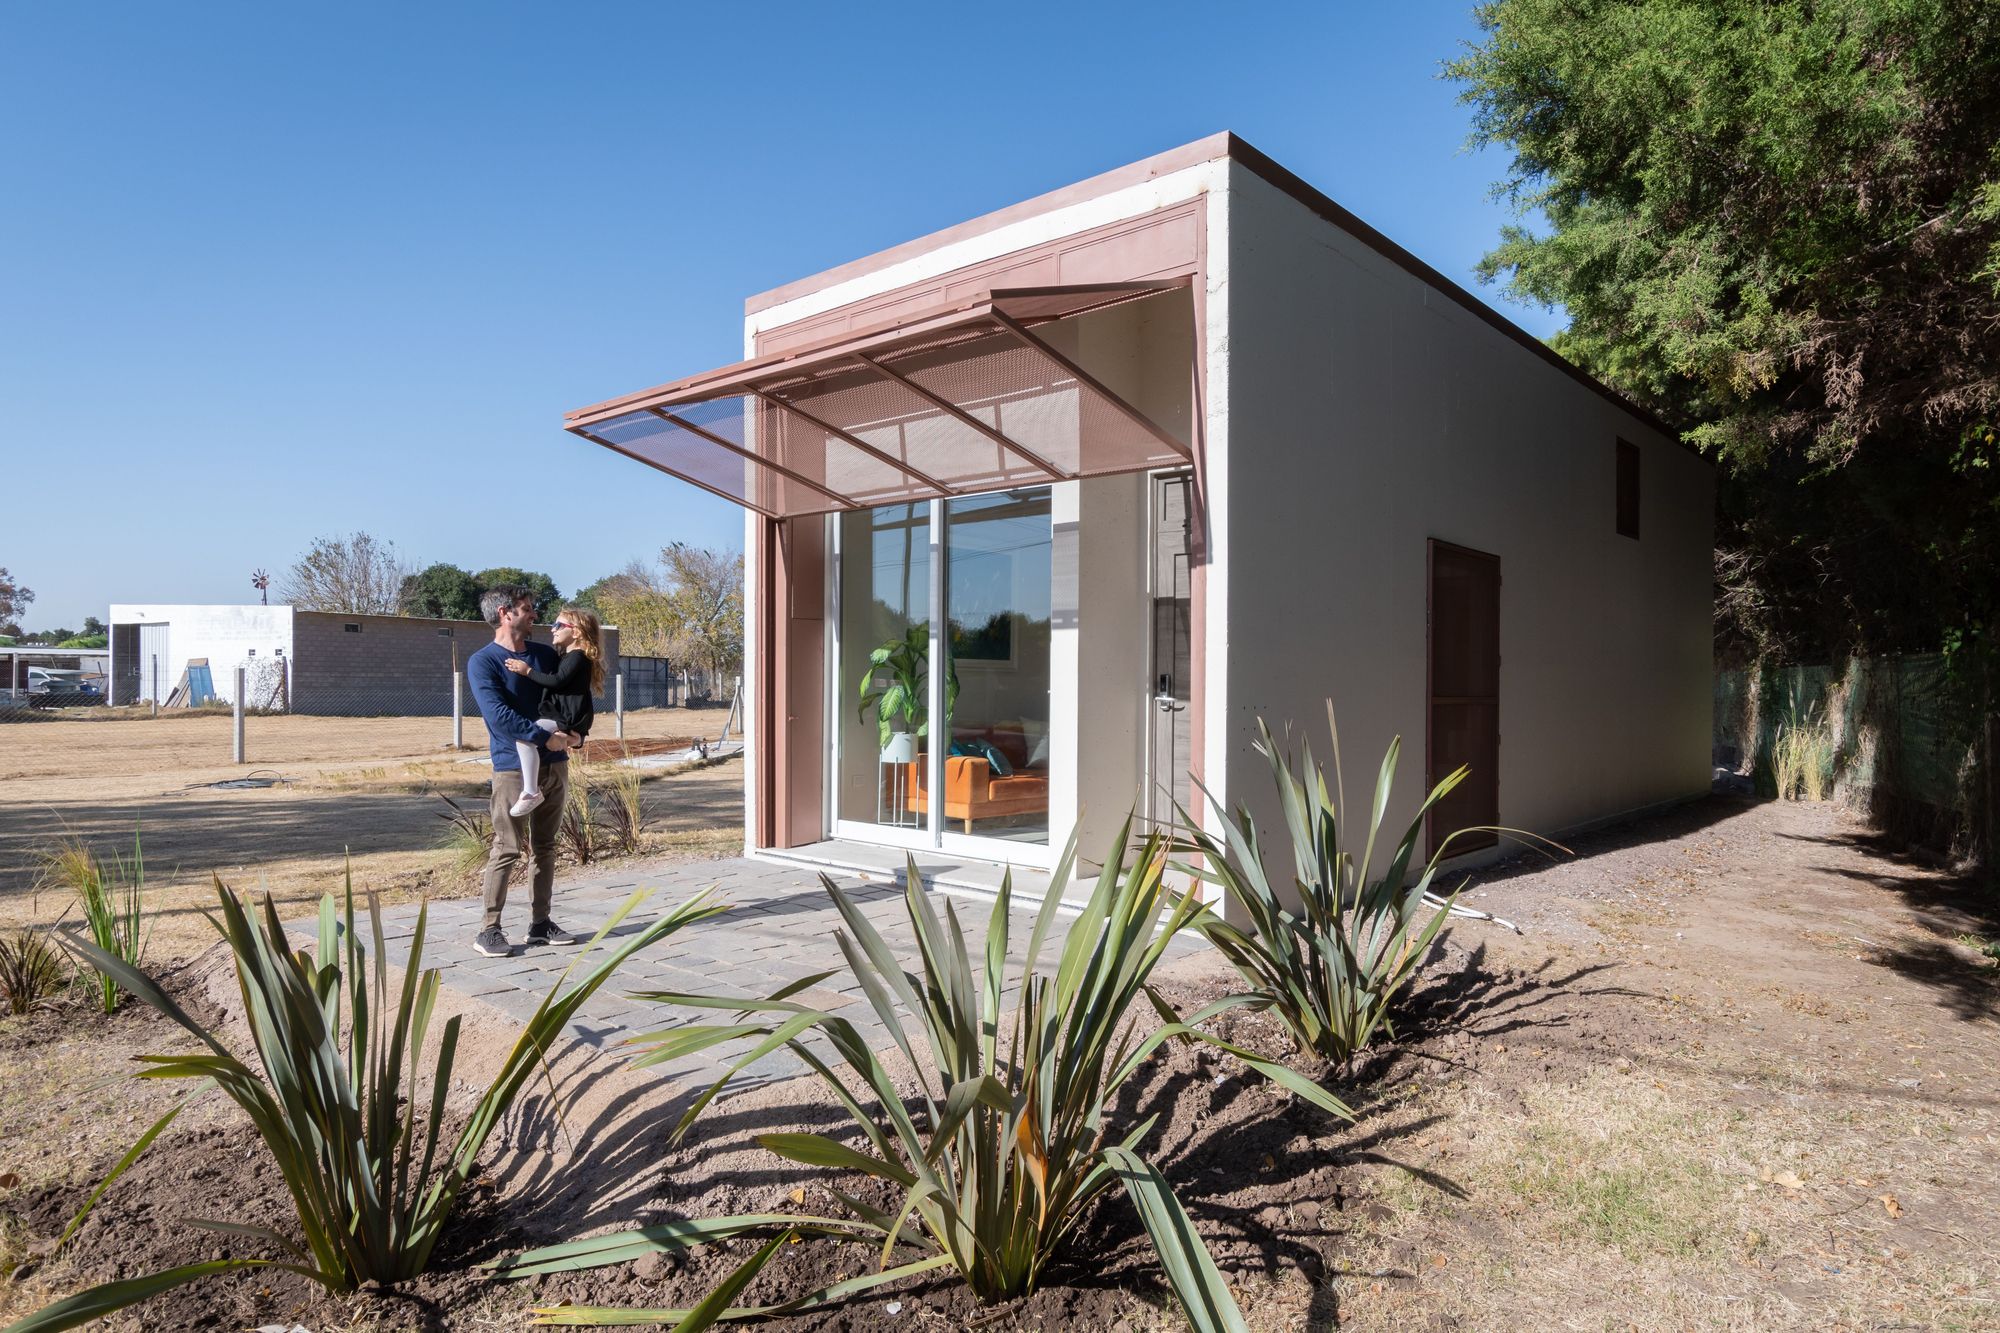 A Modern Prefab House Designed To Be Nearly Indestructible Assembles In Just 24 Hours